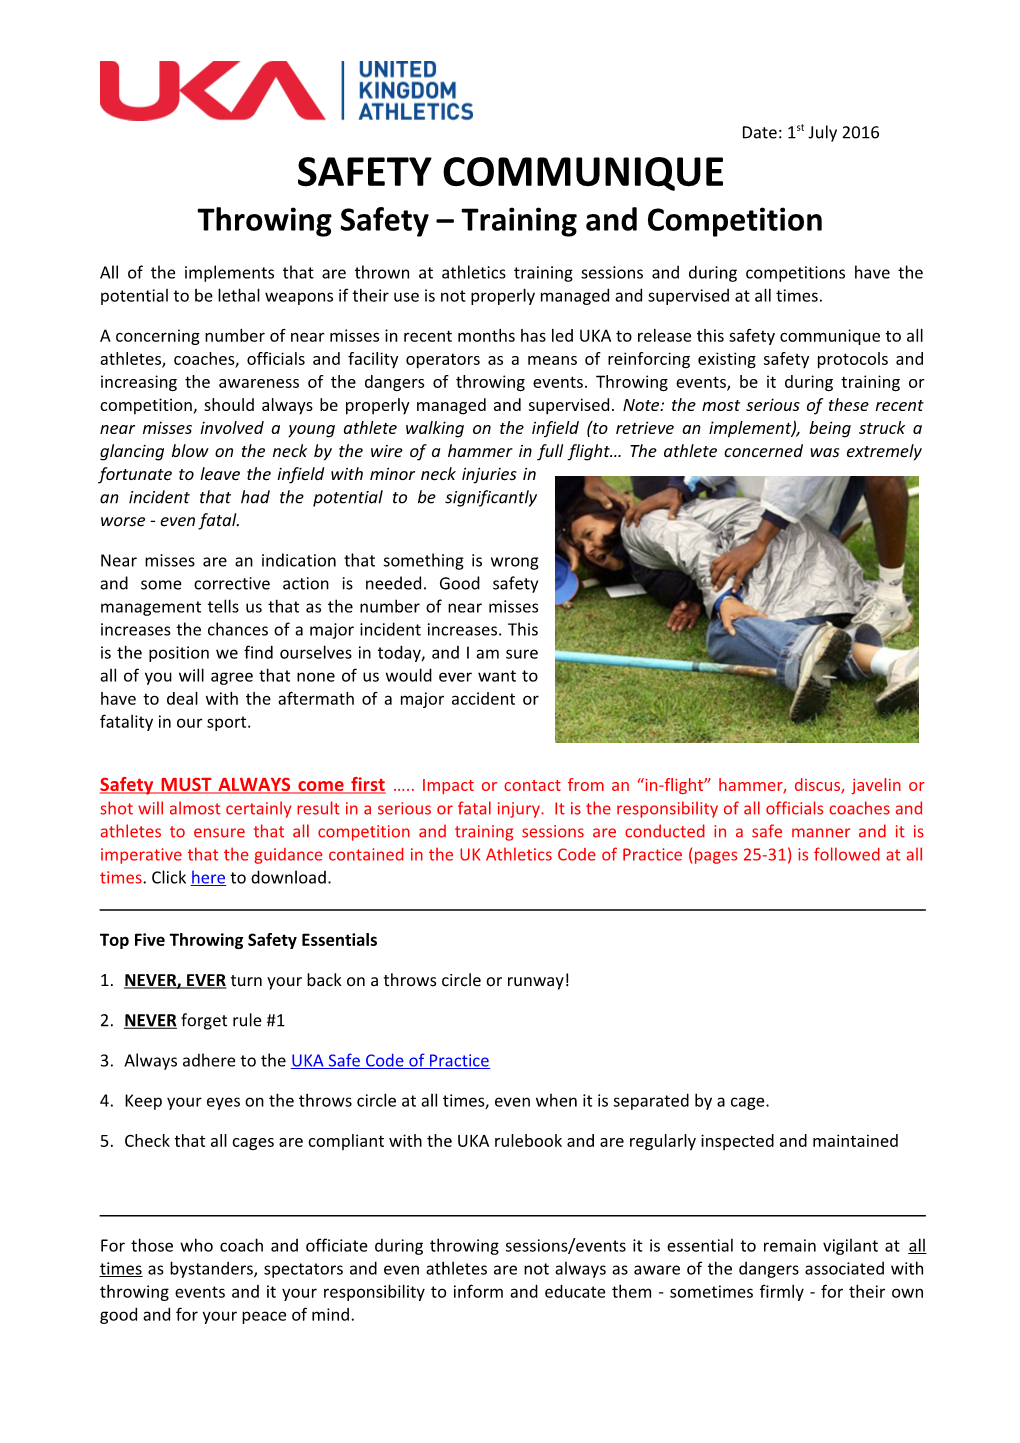 Throwing Safety Training and Competition